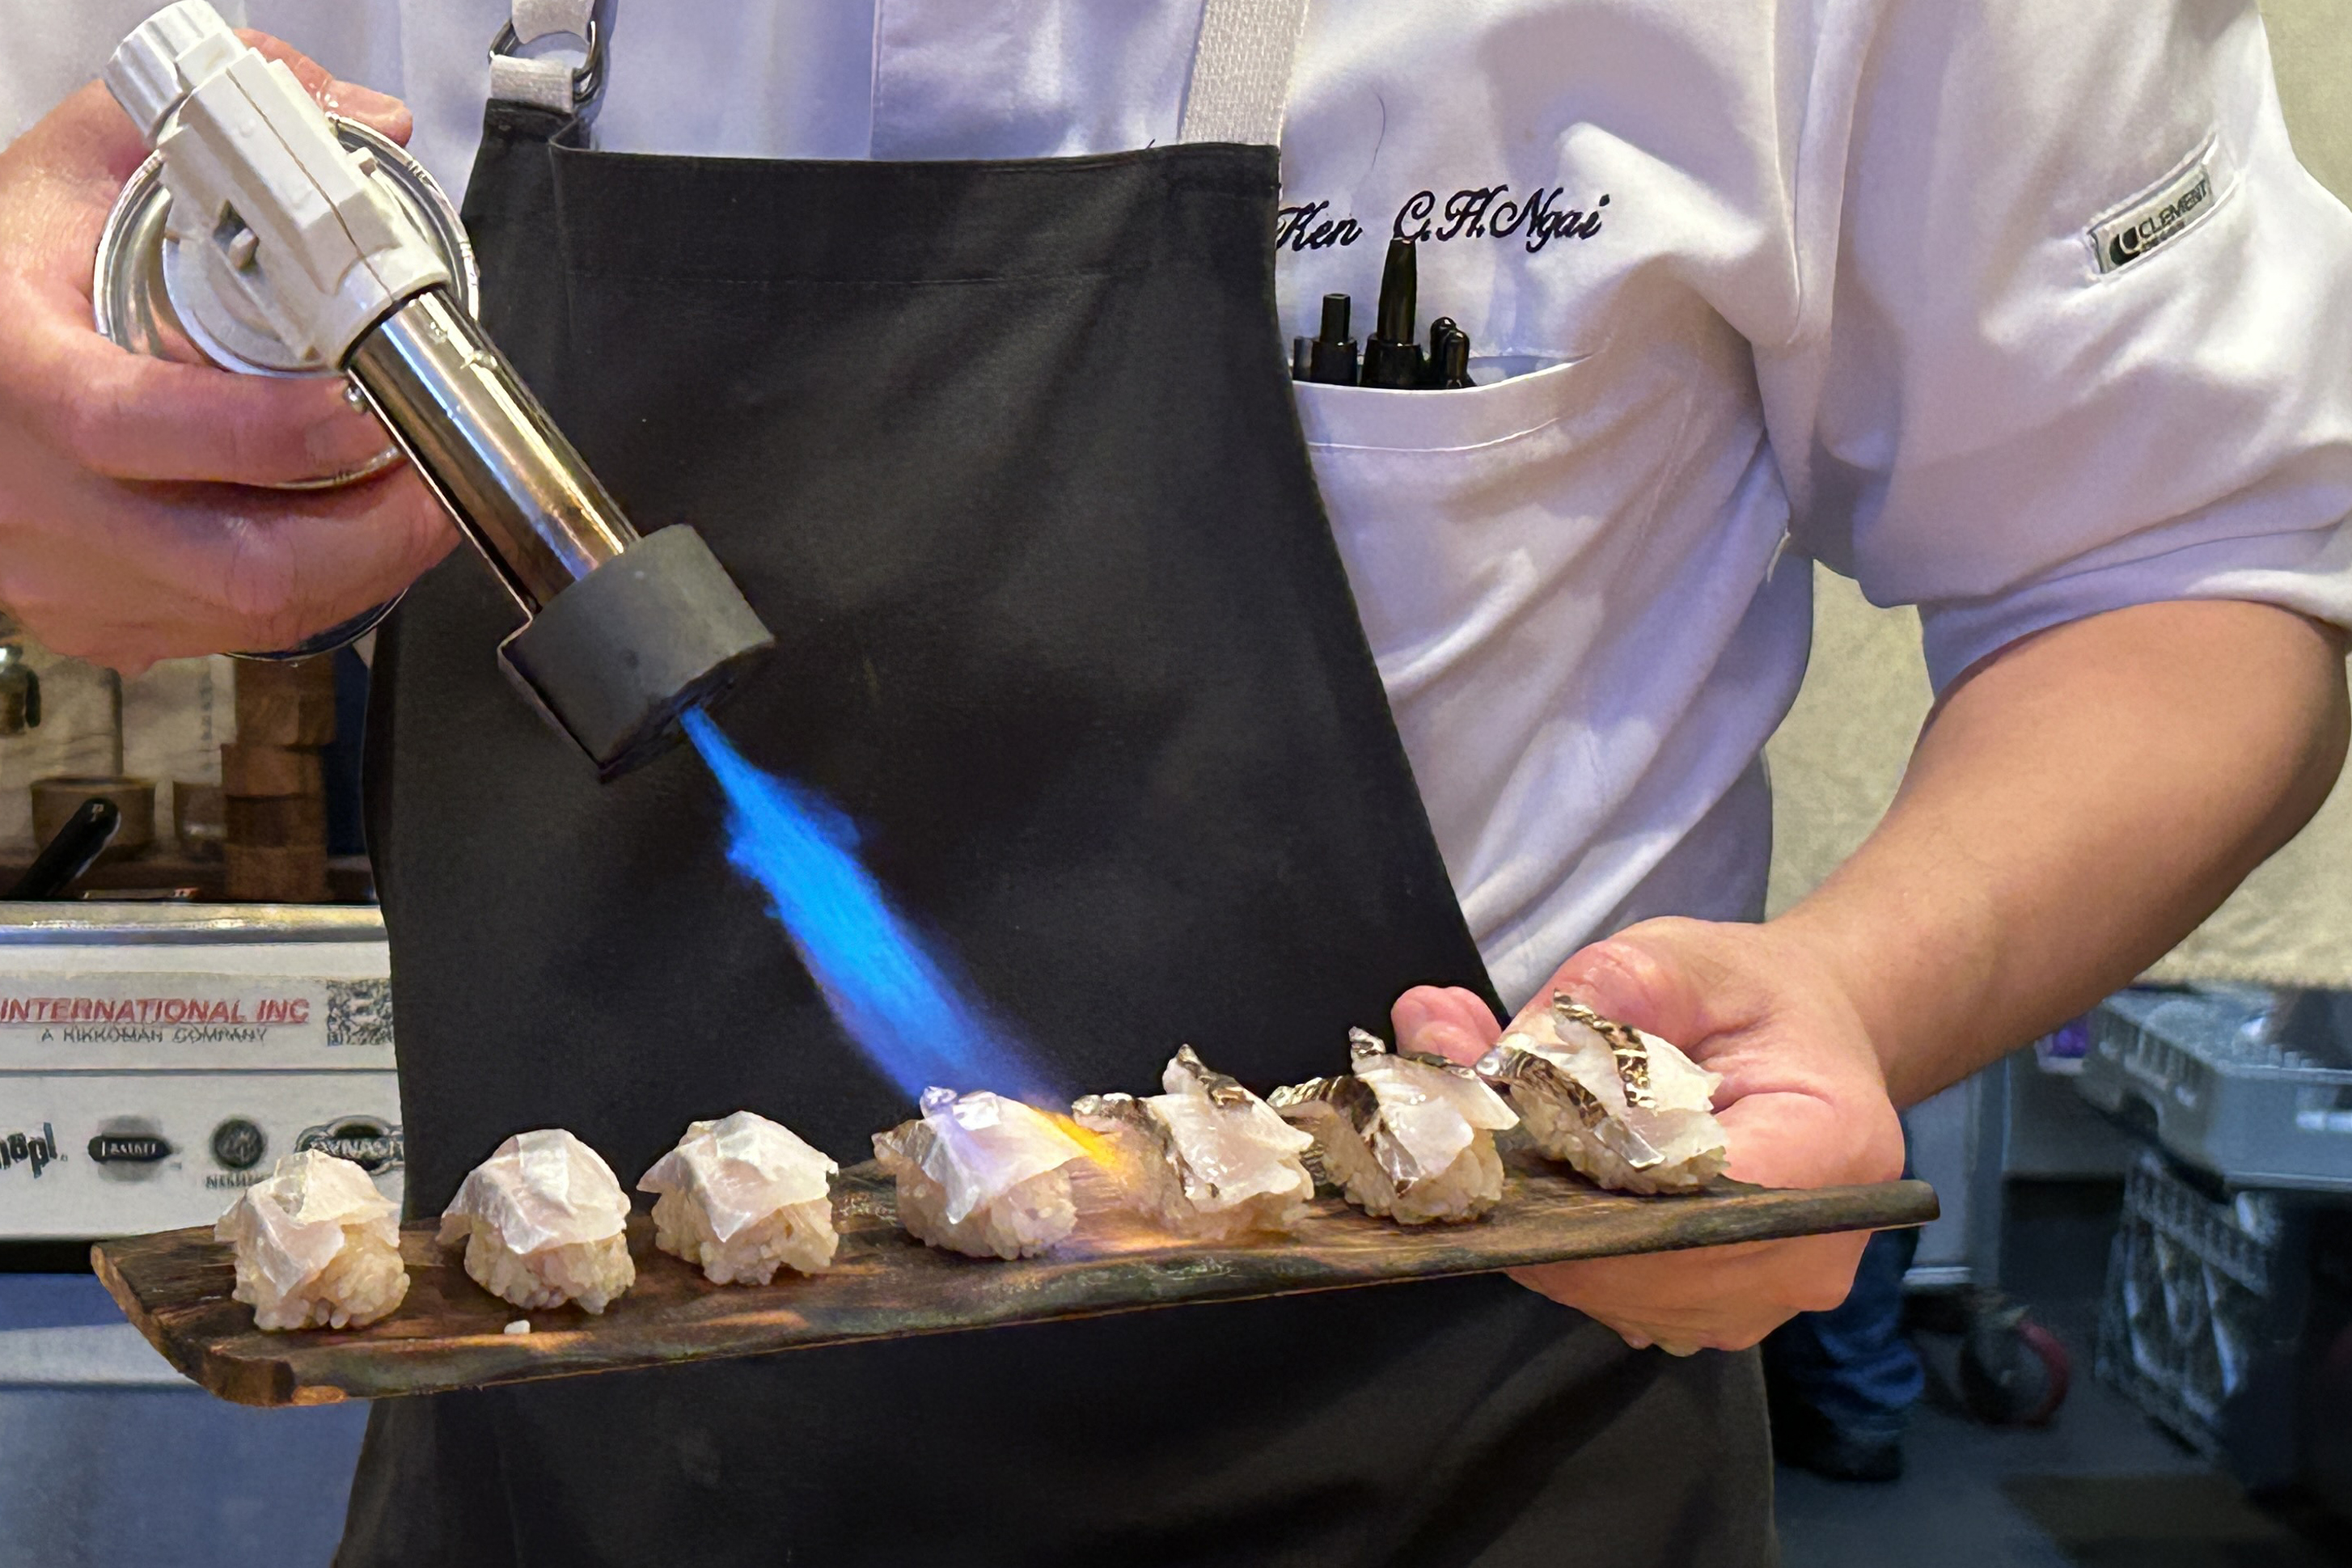 A chef uses a blowtorch to sear a row of sushi pieces arranged on a wooden tray, each topped with a thin slice of fish.